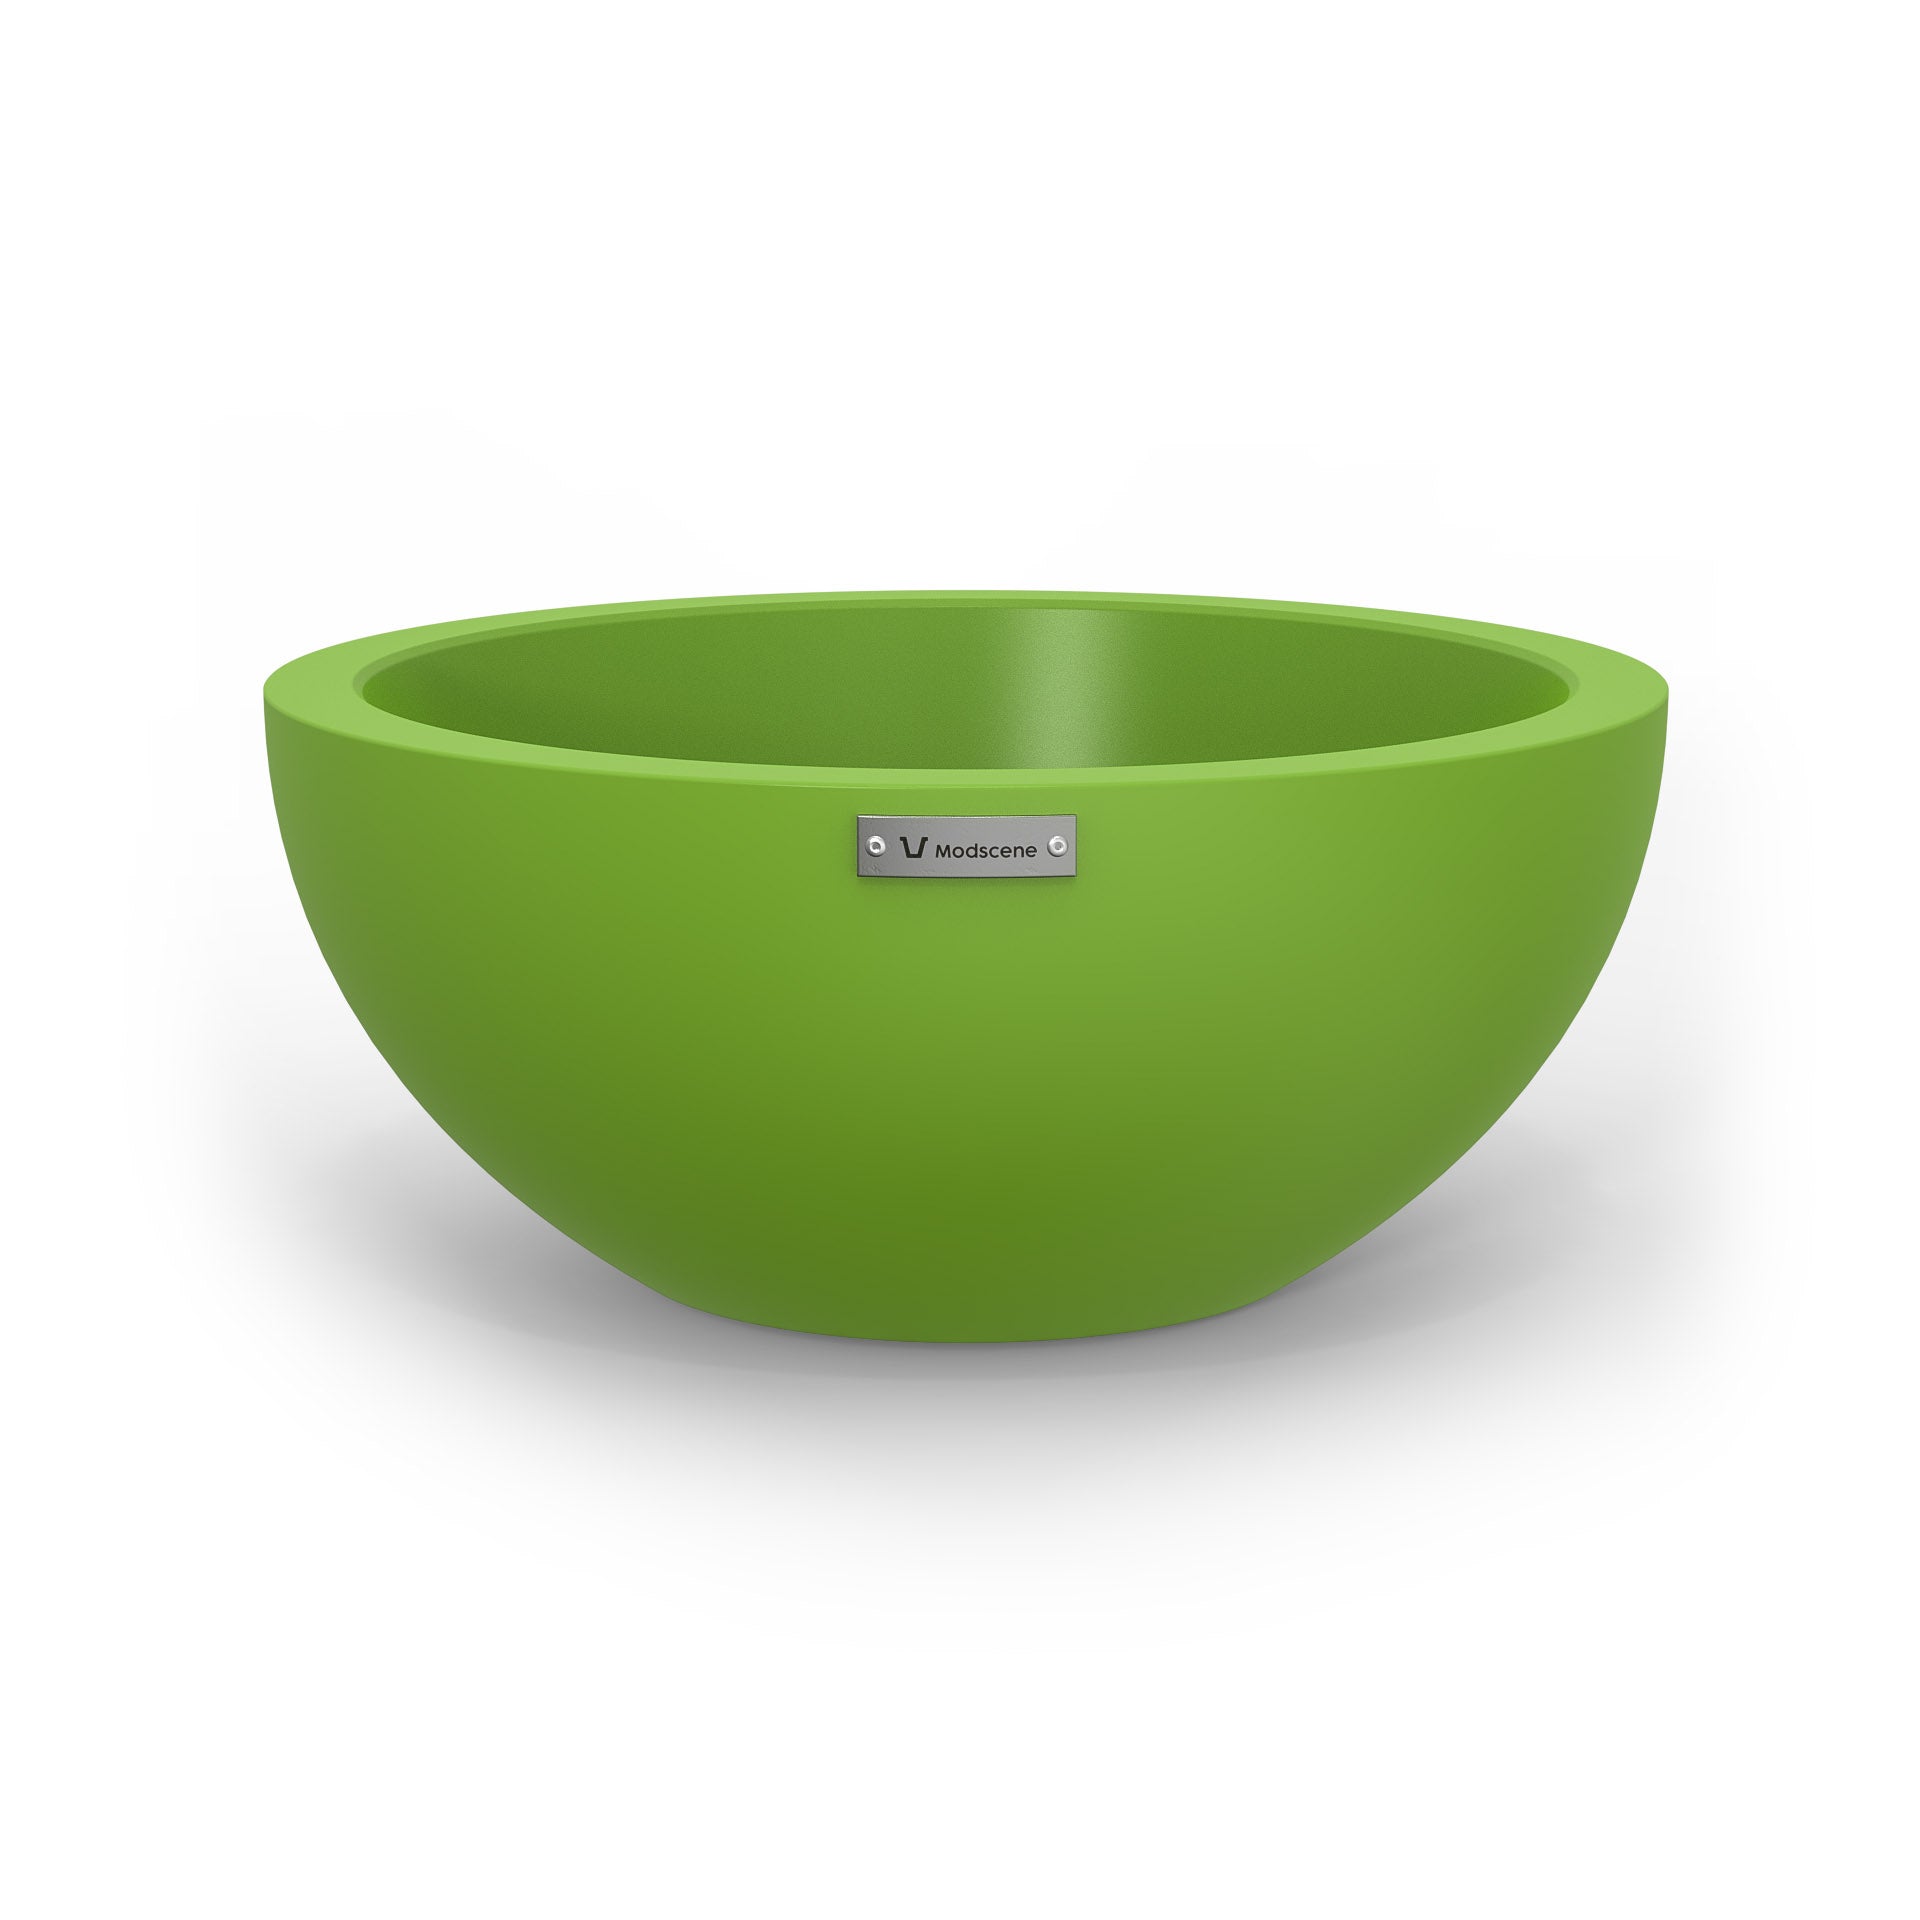 A small planter bowl in green made by Modscene. Australian planters.